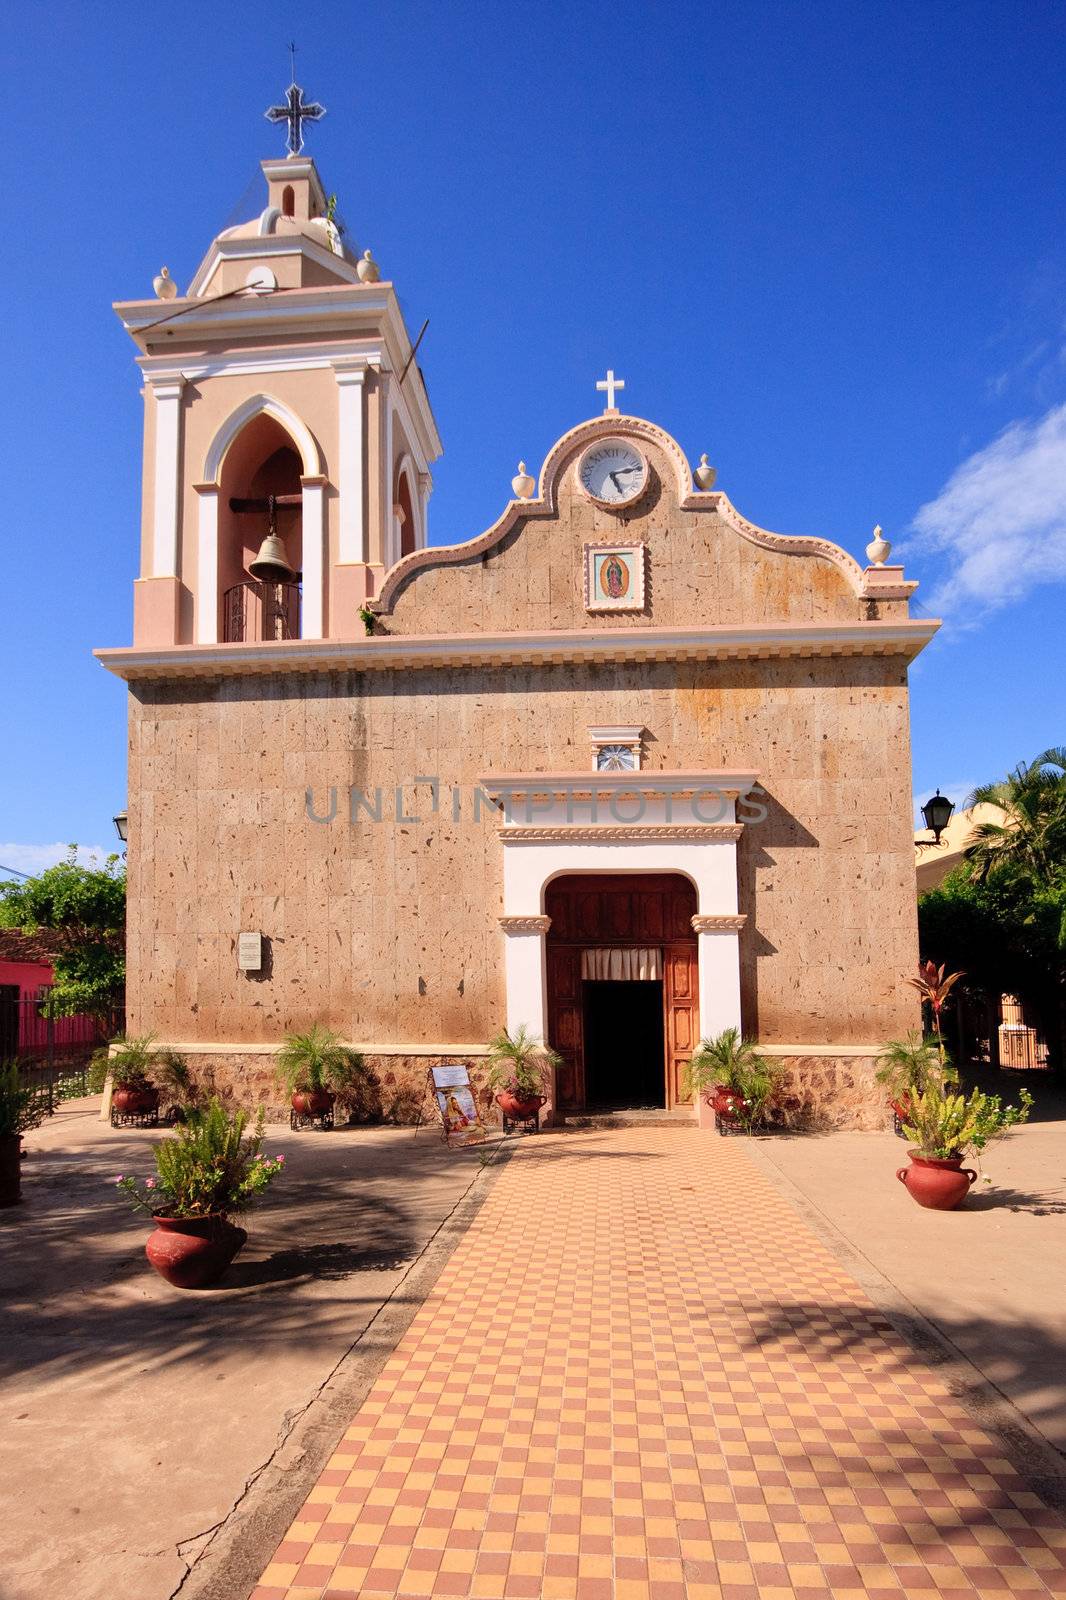 Front view of El Quelite Church in Mexico by steheap